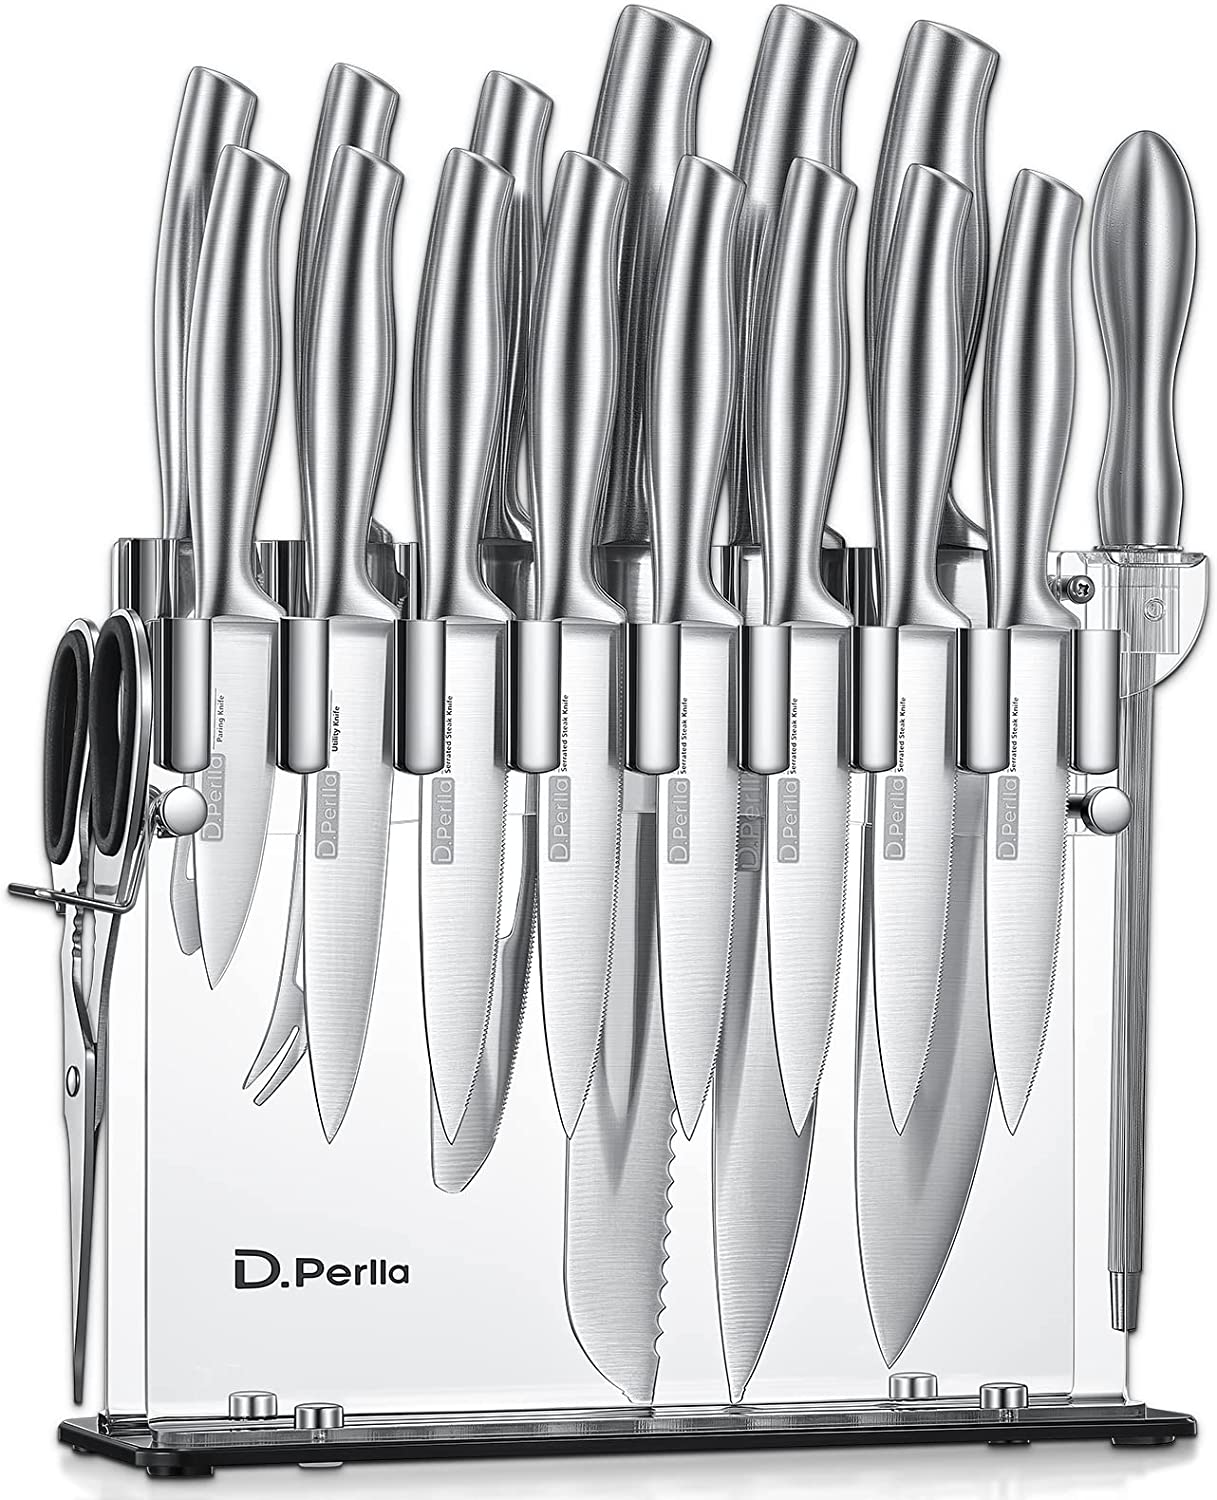 D.Perlla Knife Set, 17 Pieces kitchen Knife Set with Clear Acrylic Knife Block, Stainless Steel Super Sharp Chef Knife Set with Hollow Handle in One Piece Design